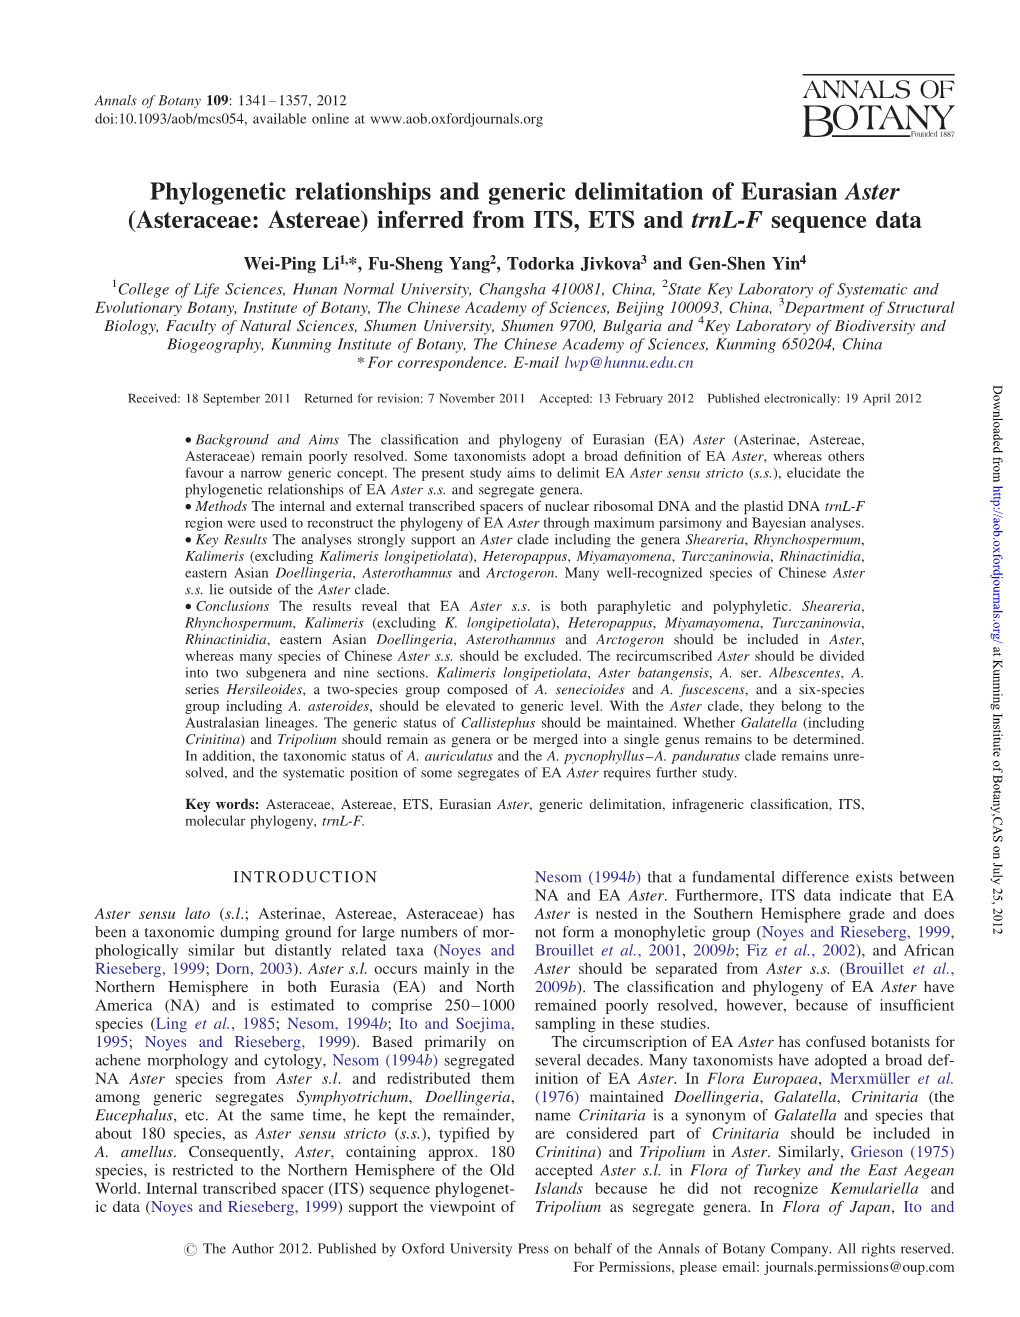 Phylogenetic Relationships and Generic Delimitation of Eurasian Aster (Asteraceae: Astereae) Inferred from ITS, ETS and Trnl-F Sequence Data